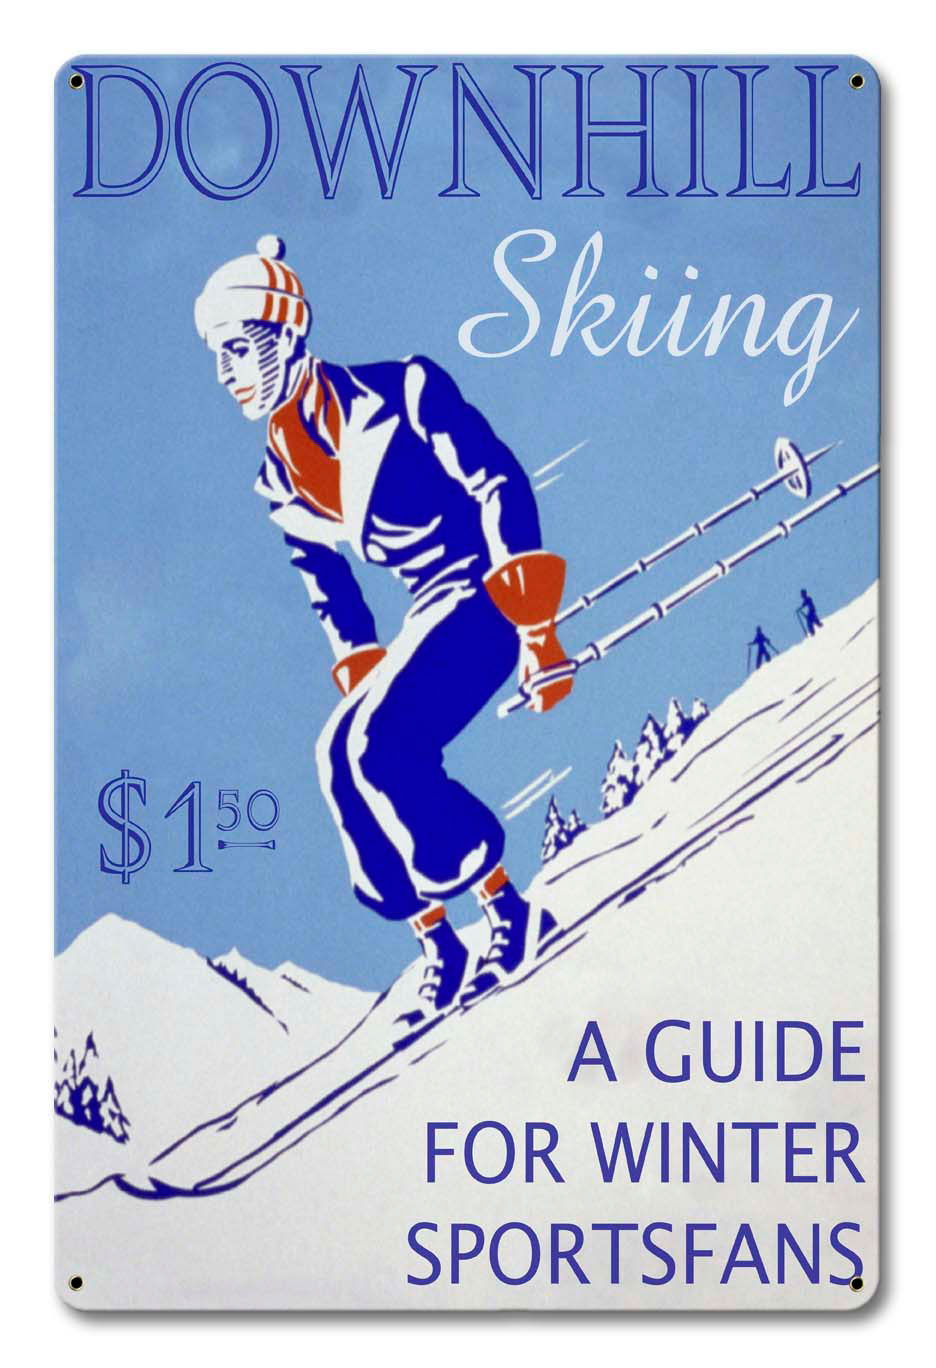 Downhill Skiing Guide Vintage Sign